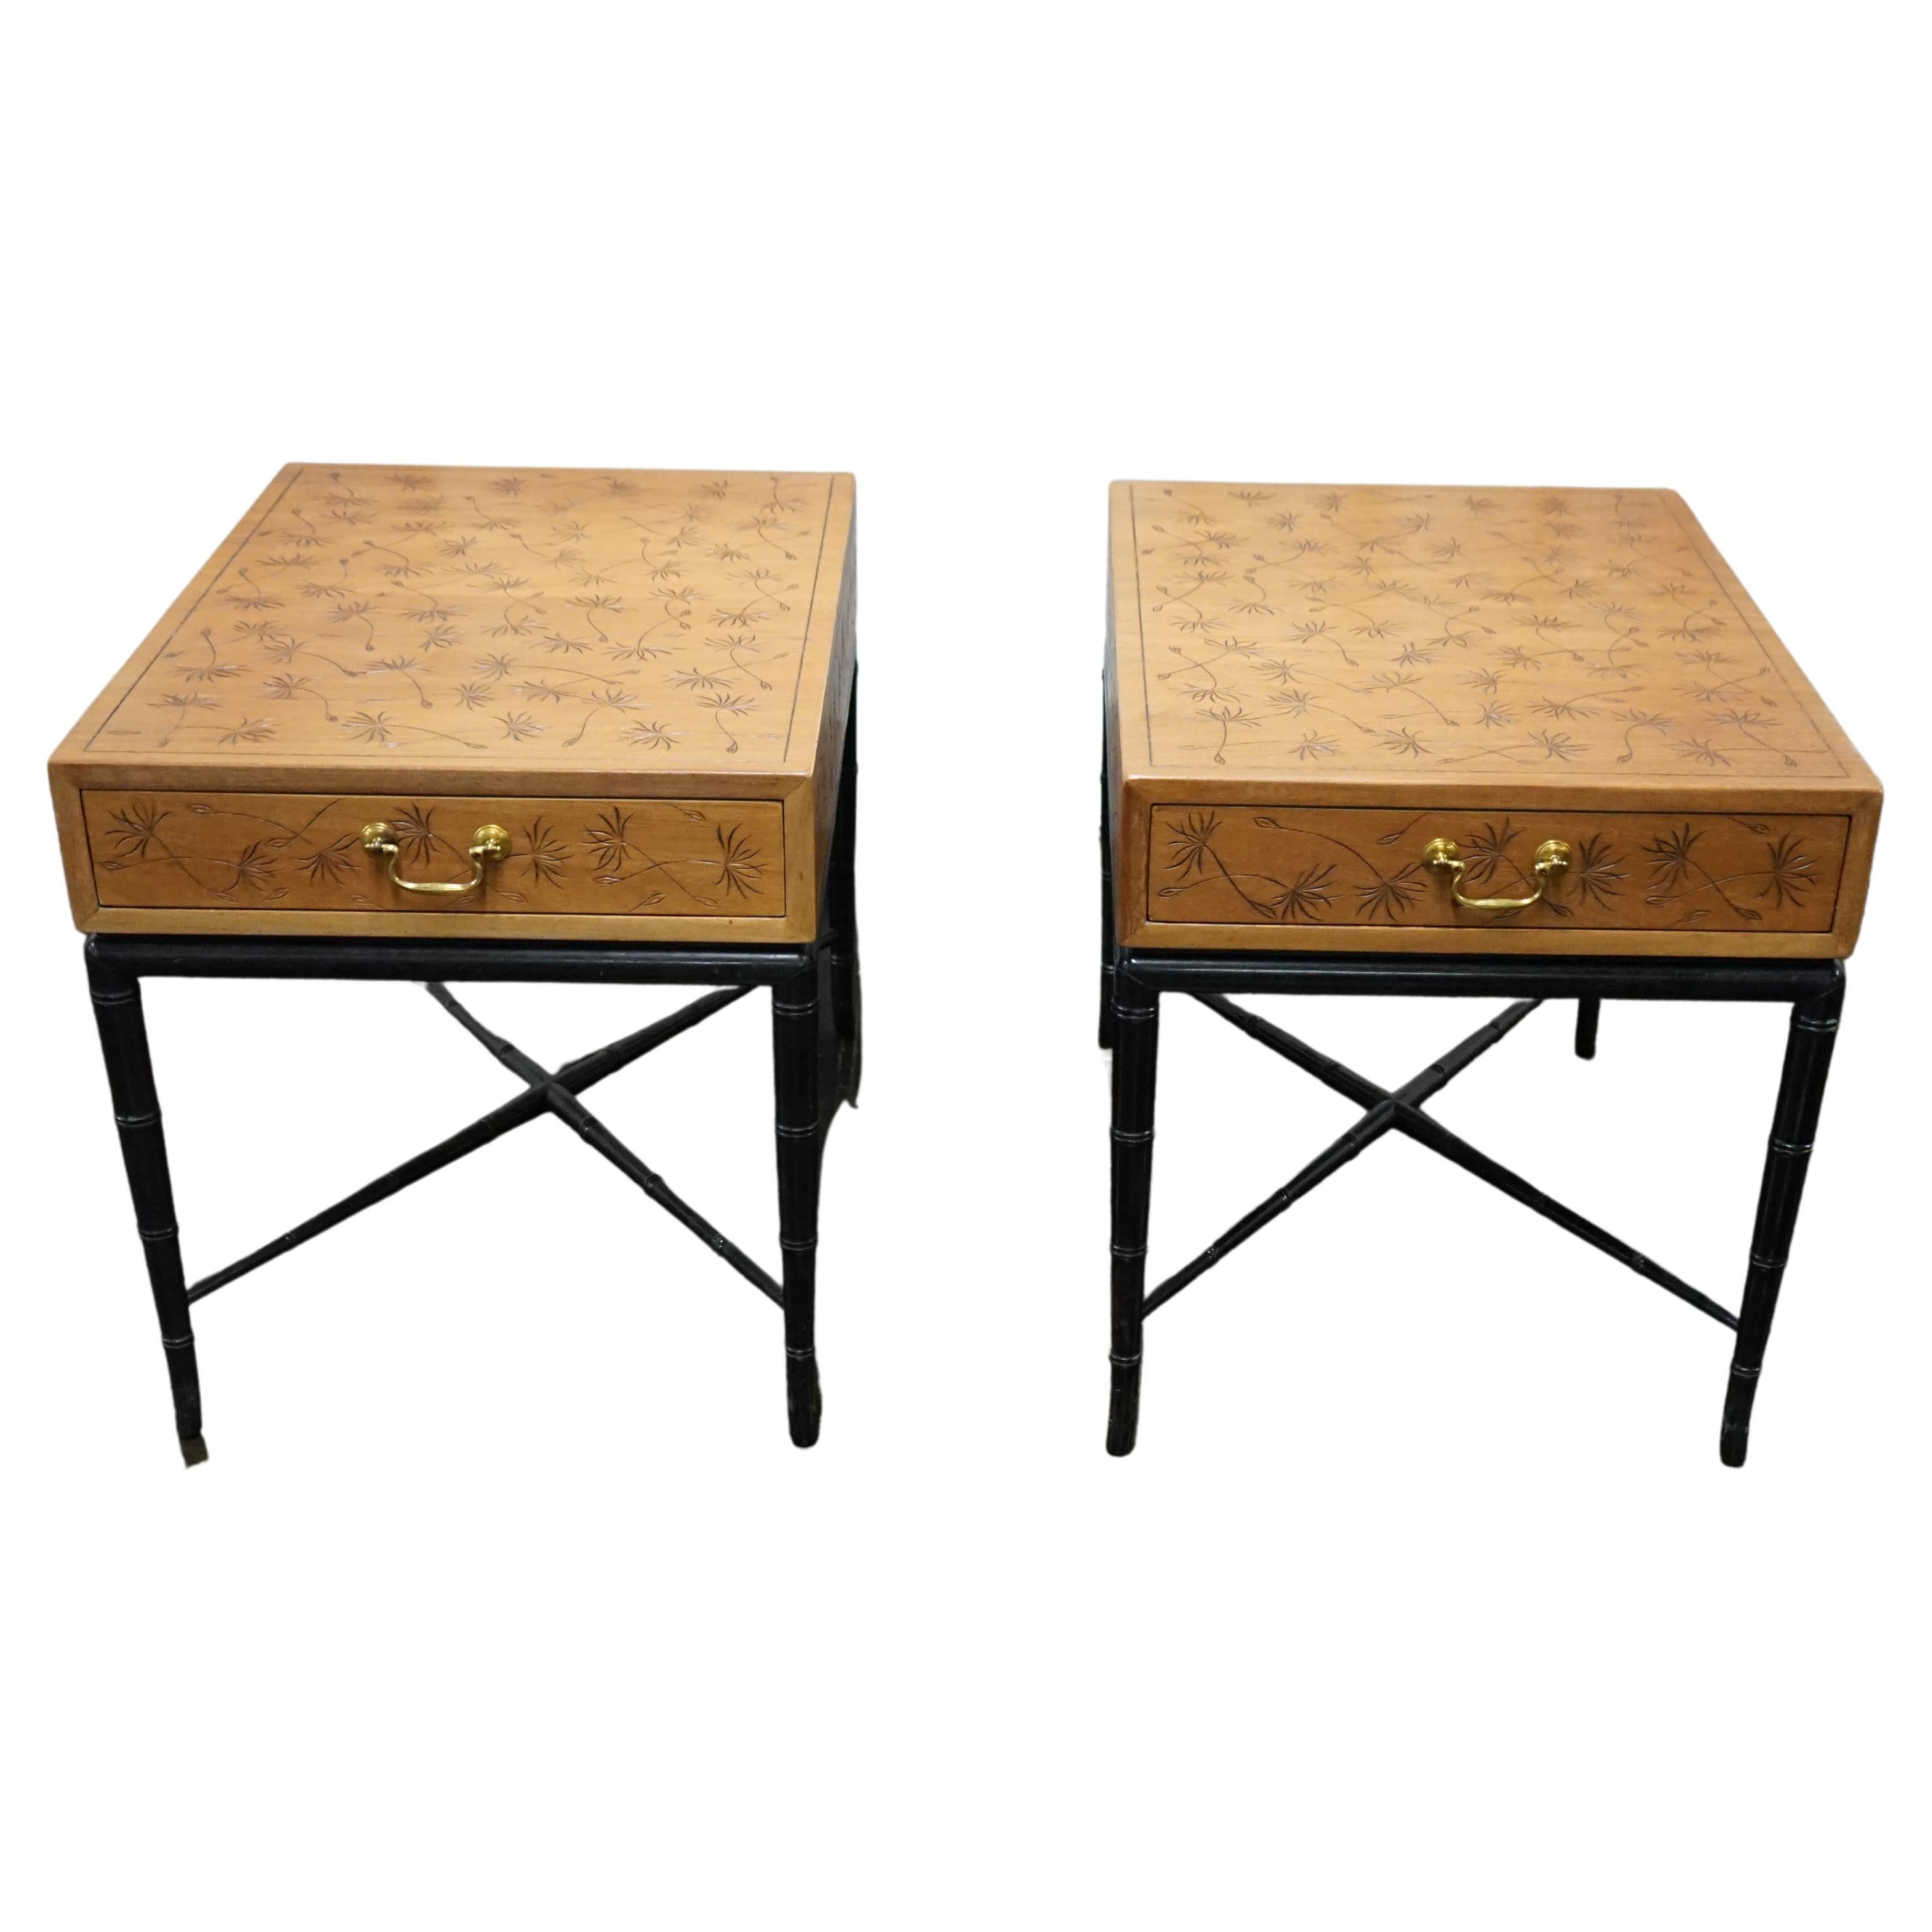 Pair of Midcentury Kittinger Side Tables with Drawers on Faux Bamboo Base